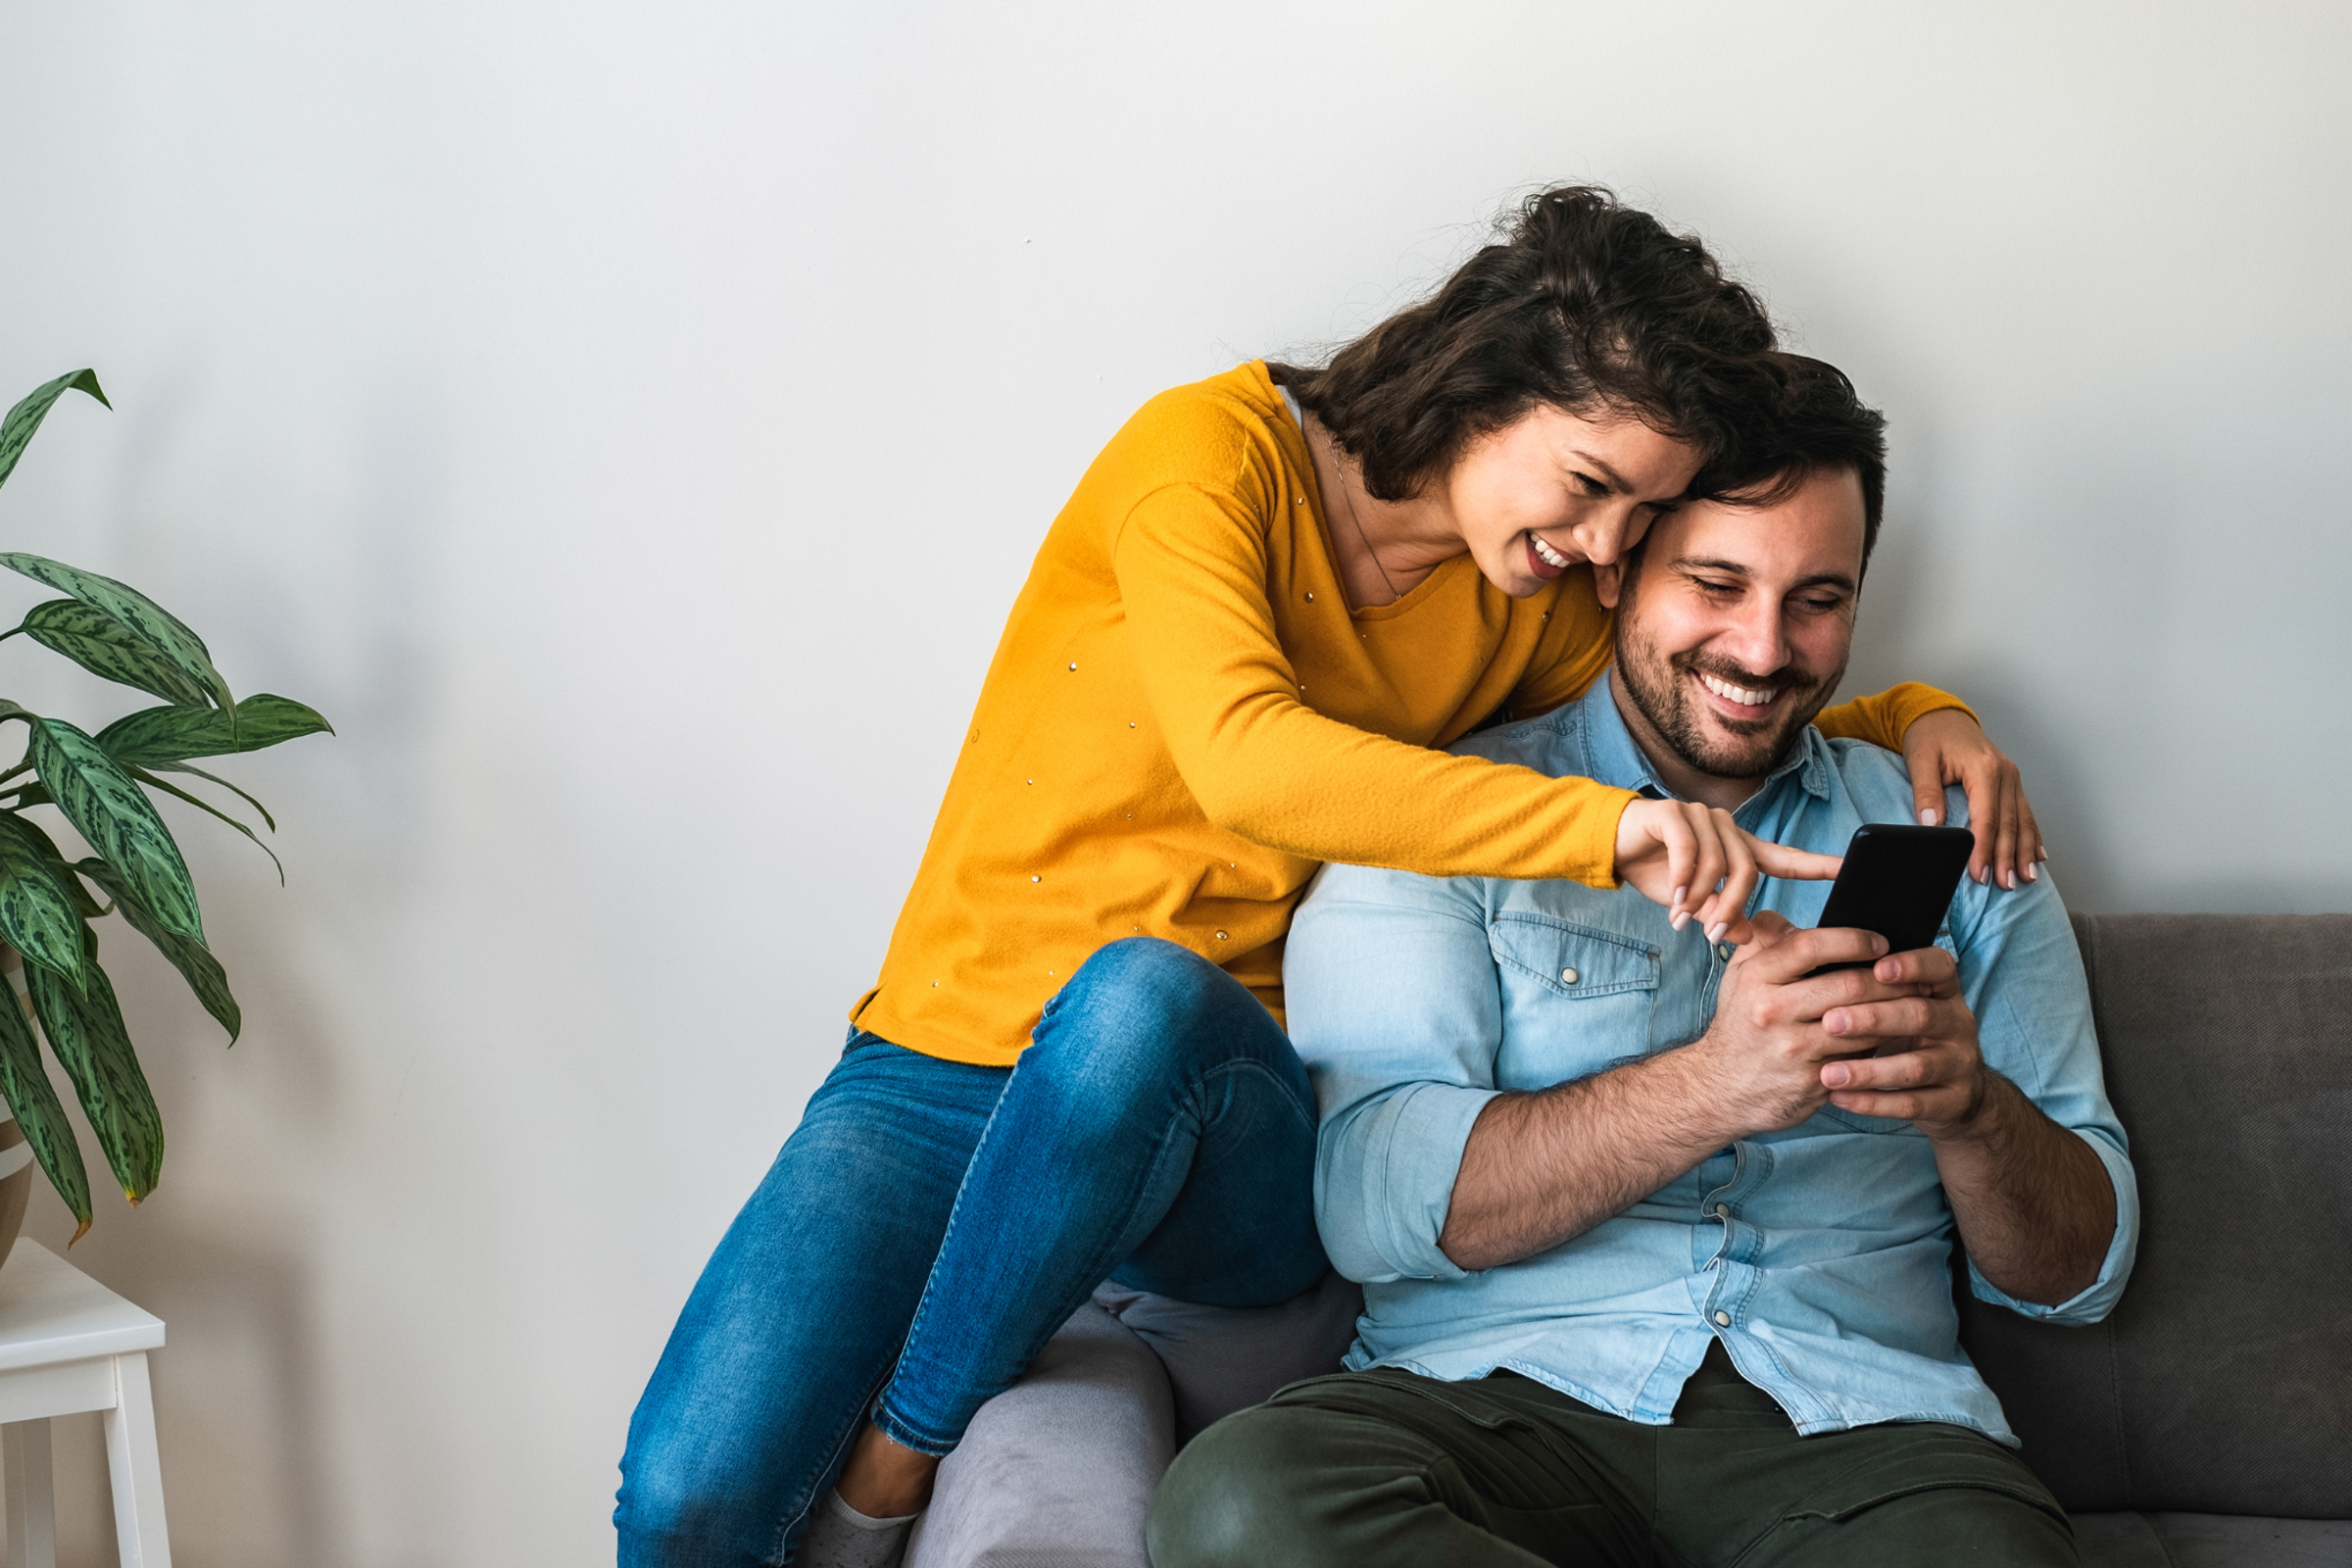 Young couple looking at smartphone together while on couch